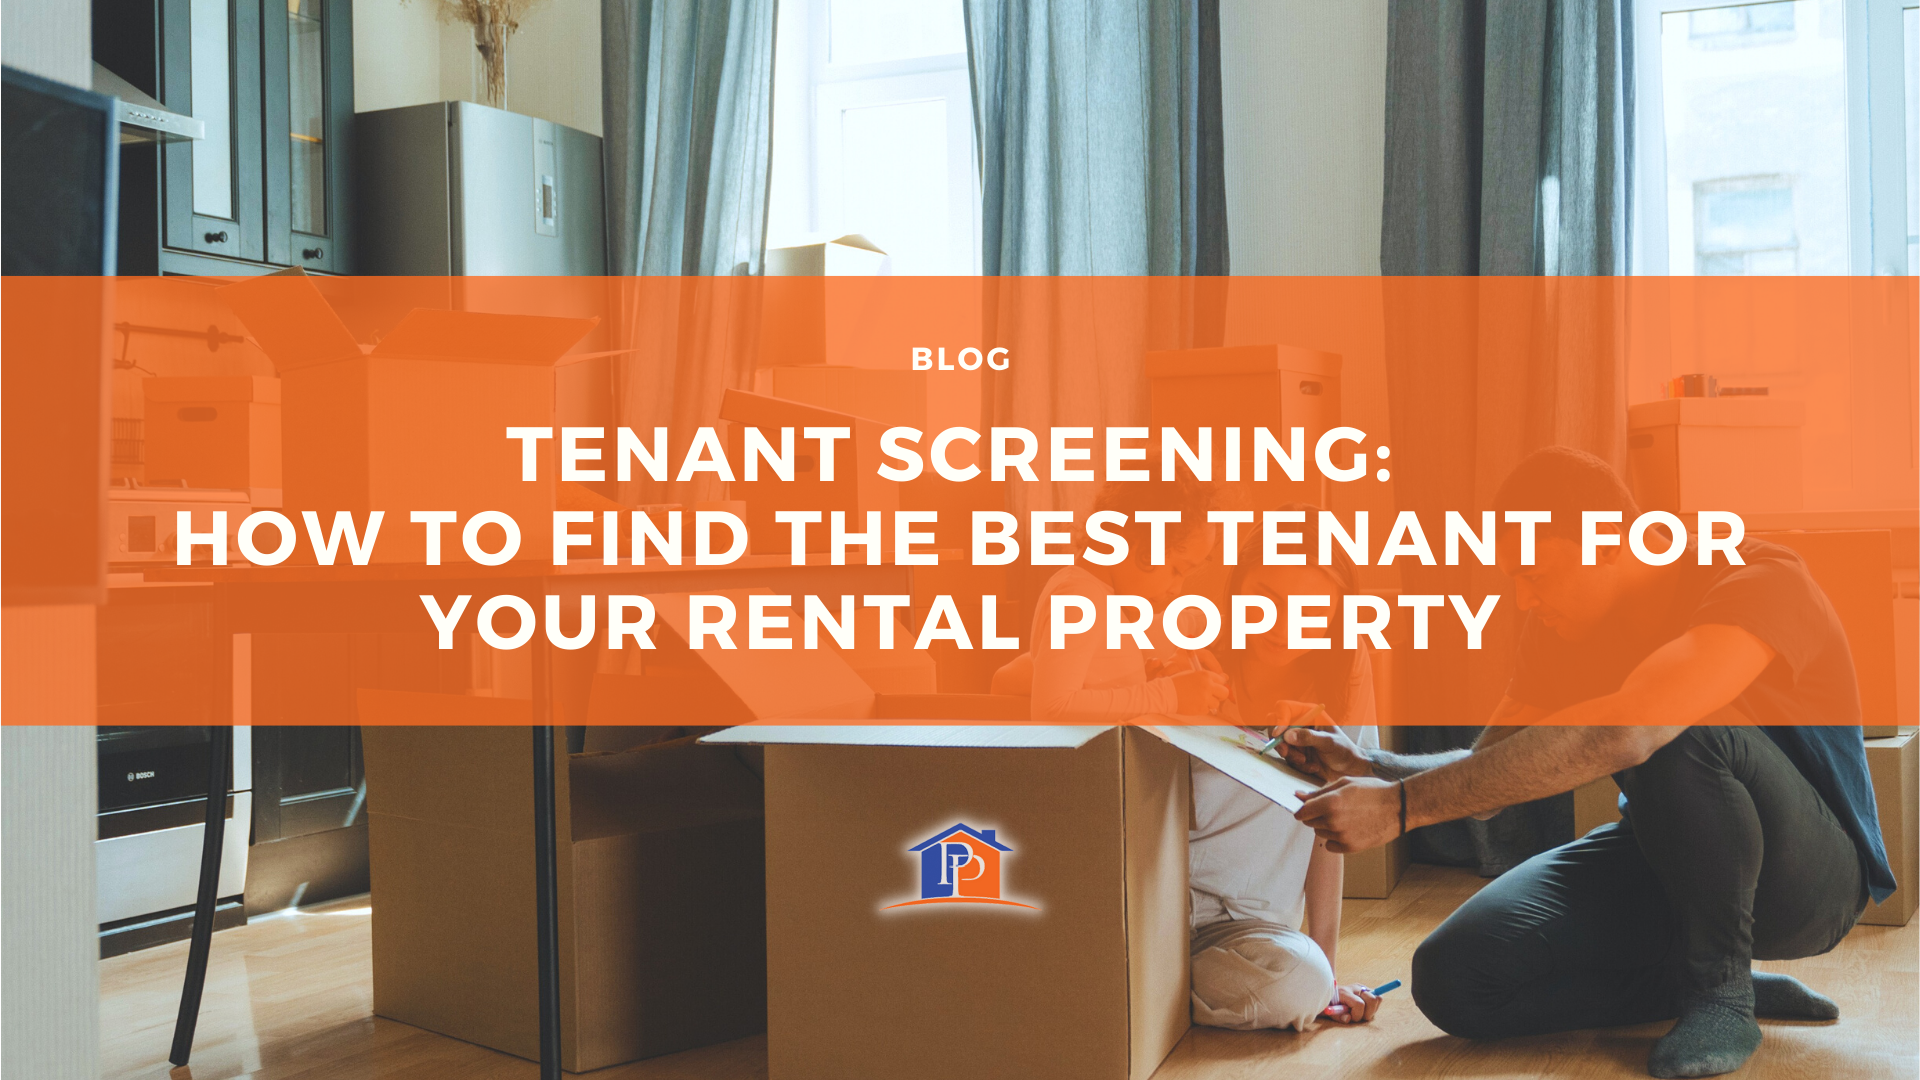 Tenant Screening: How to Find the Best Tenant for Your Rental Property